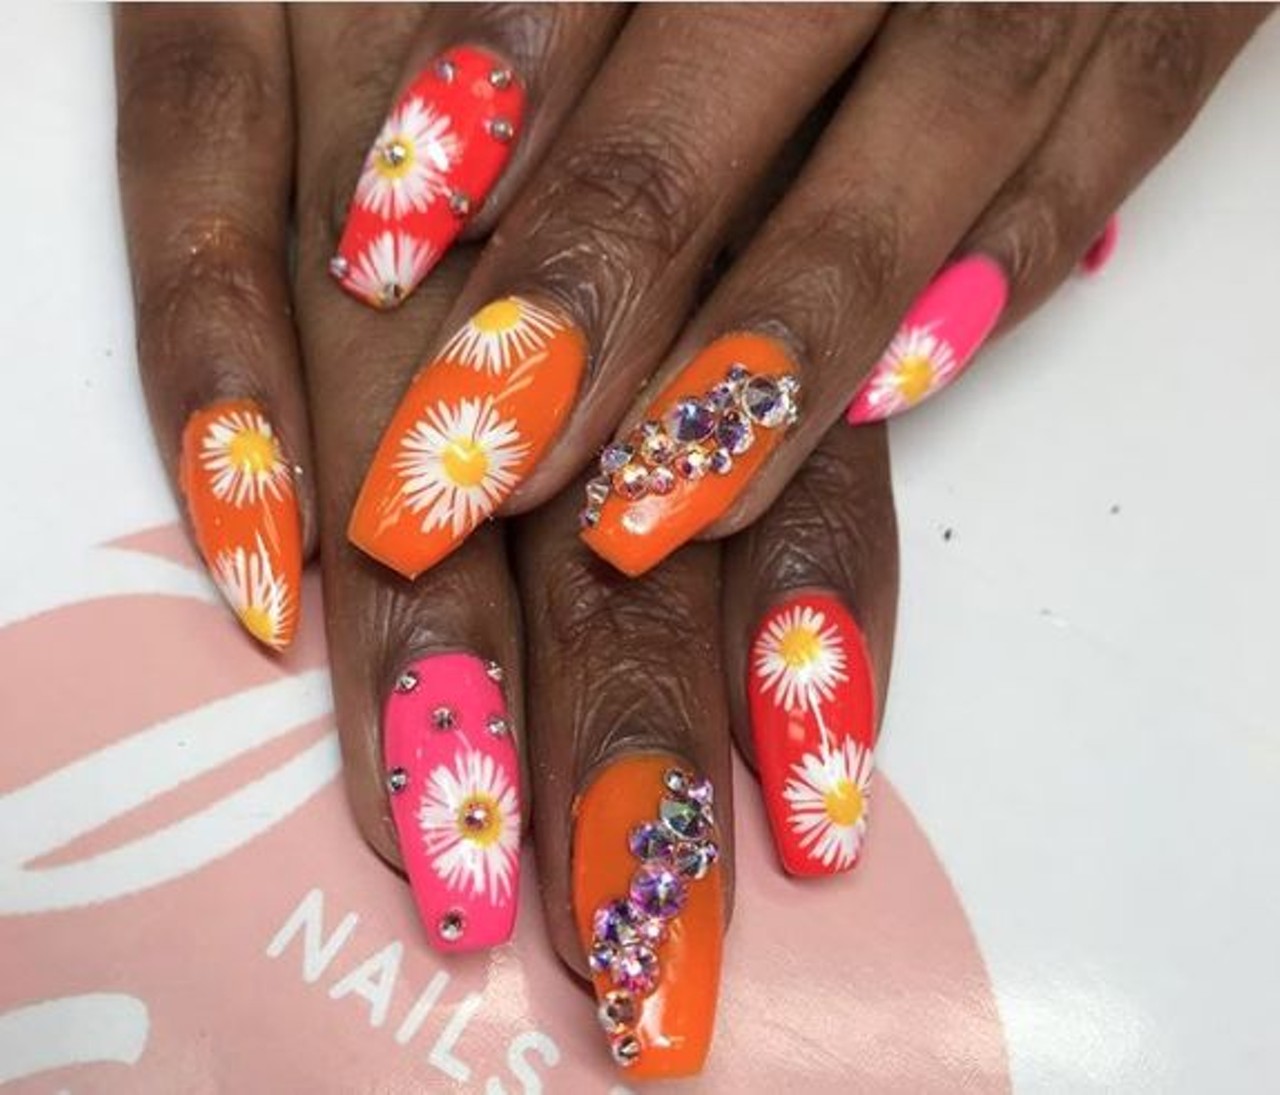  nailsbylanni
24723 Cedar Rd. | (216) 269-8303 (Text only)
Lanni Jade works at Sola Salon Studios and is a licensed nail technician and instructor whose nails &#147;speak more than words.&#148; She is also the creator of Press&#146;d by Lanni, a line of nails that solves the problematic long waits at salons.
Photo via nailsbylanni/Instagram